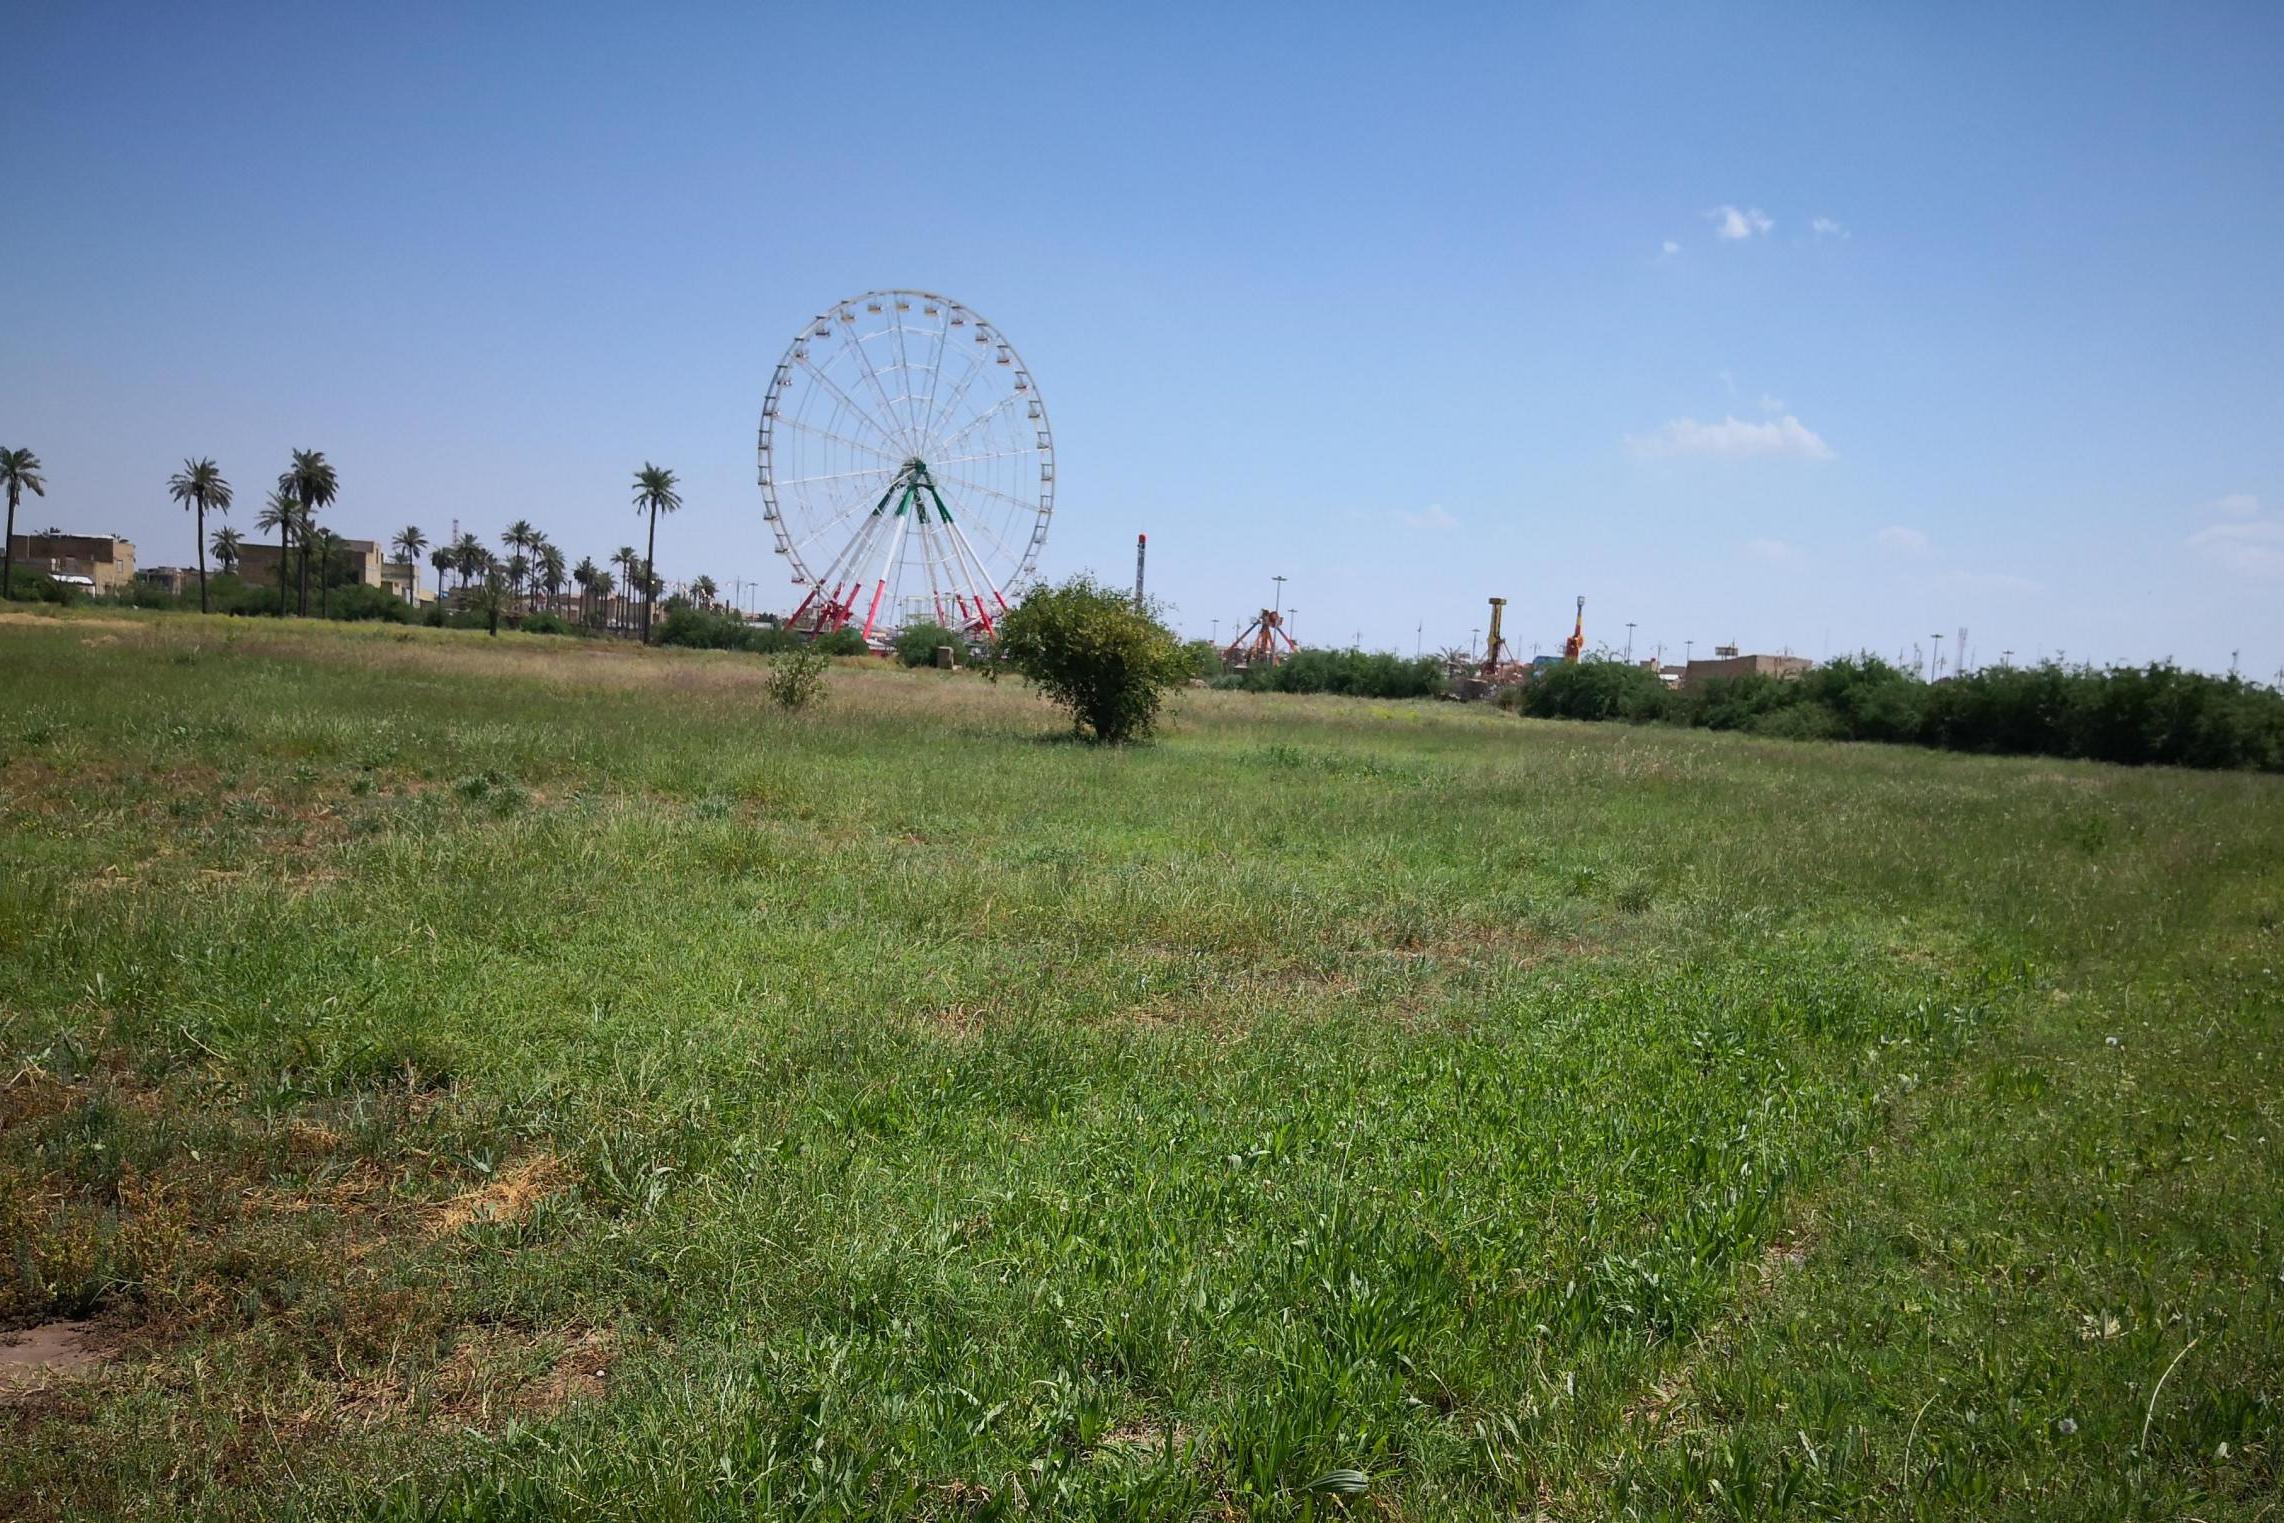 Amara cemetery today with the ‘Missan Children’s Funfair’ in the background